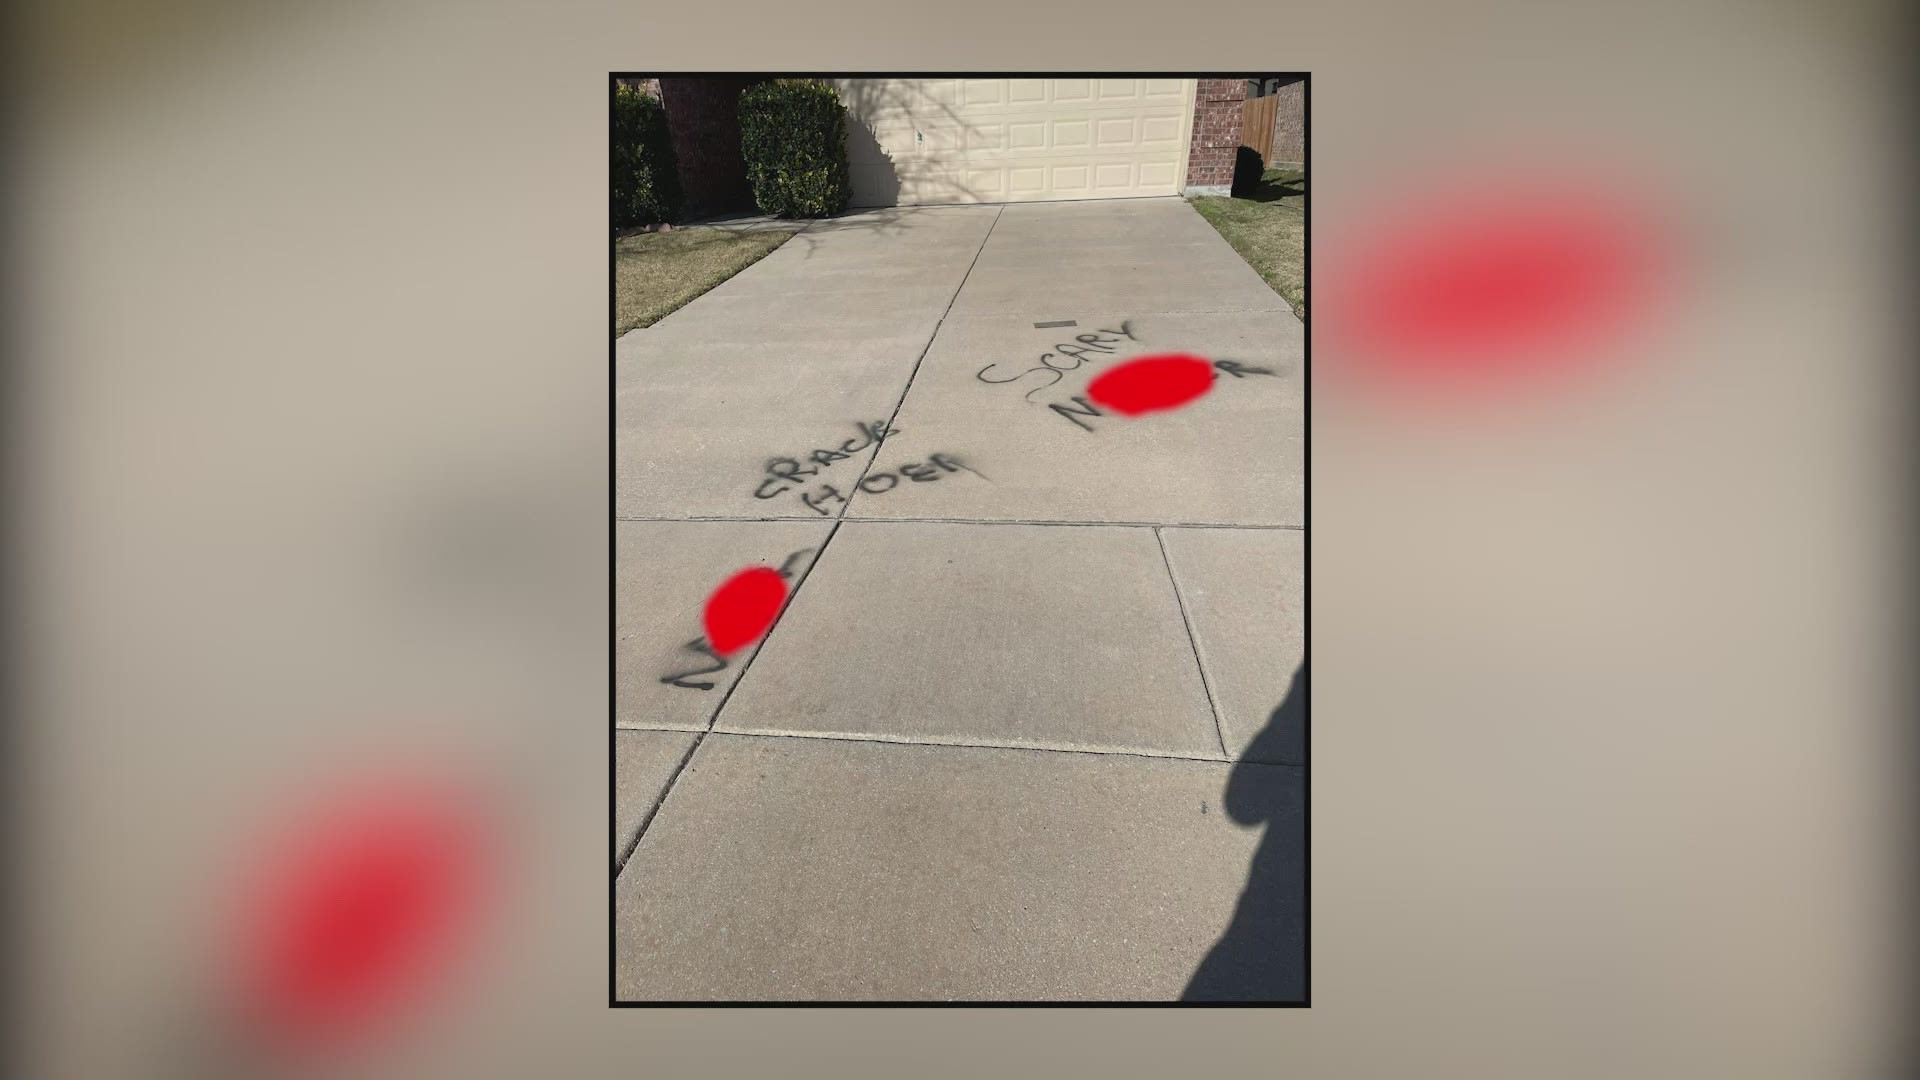 A homeowner says she has become the target of racists threats, vandalism, and other problems. Her lawyer believes an arrest should be made.